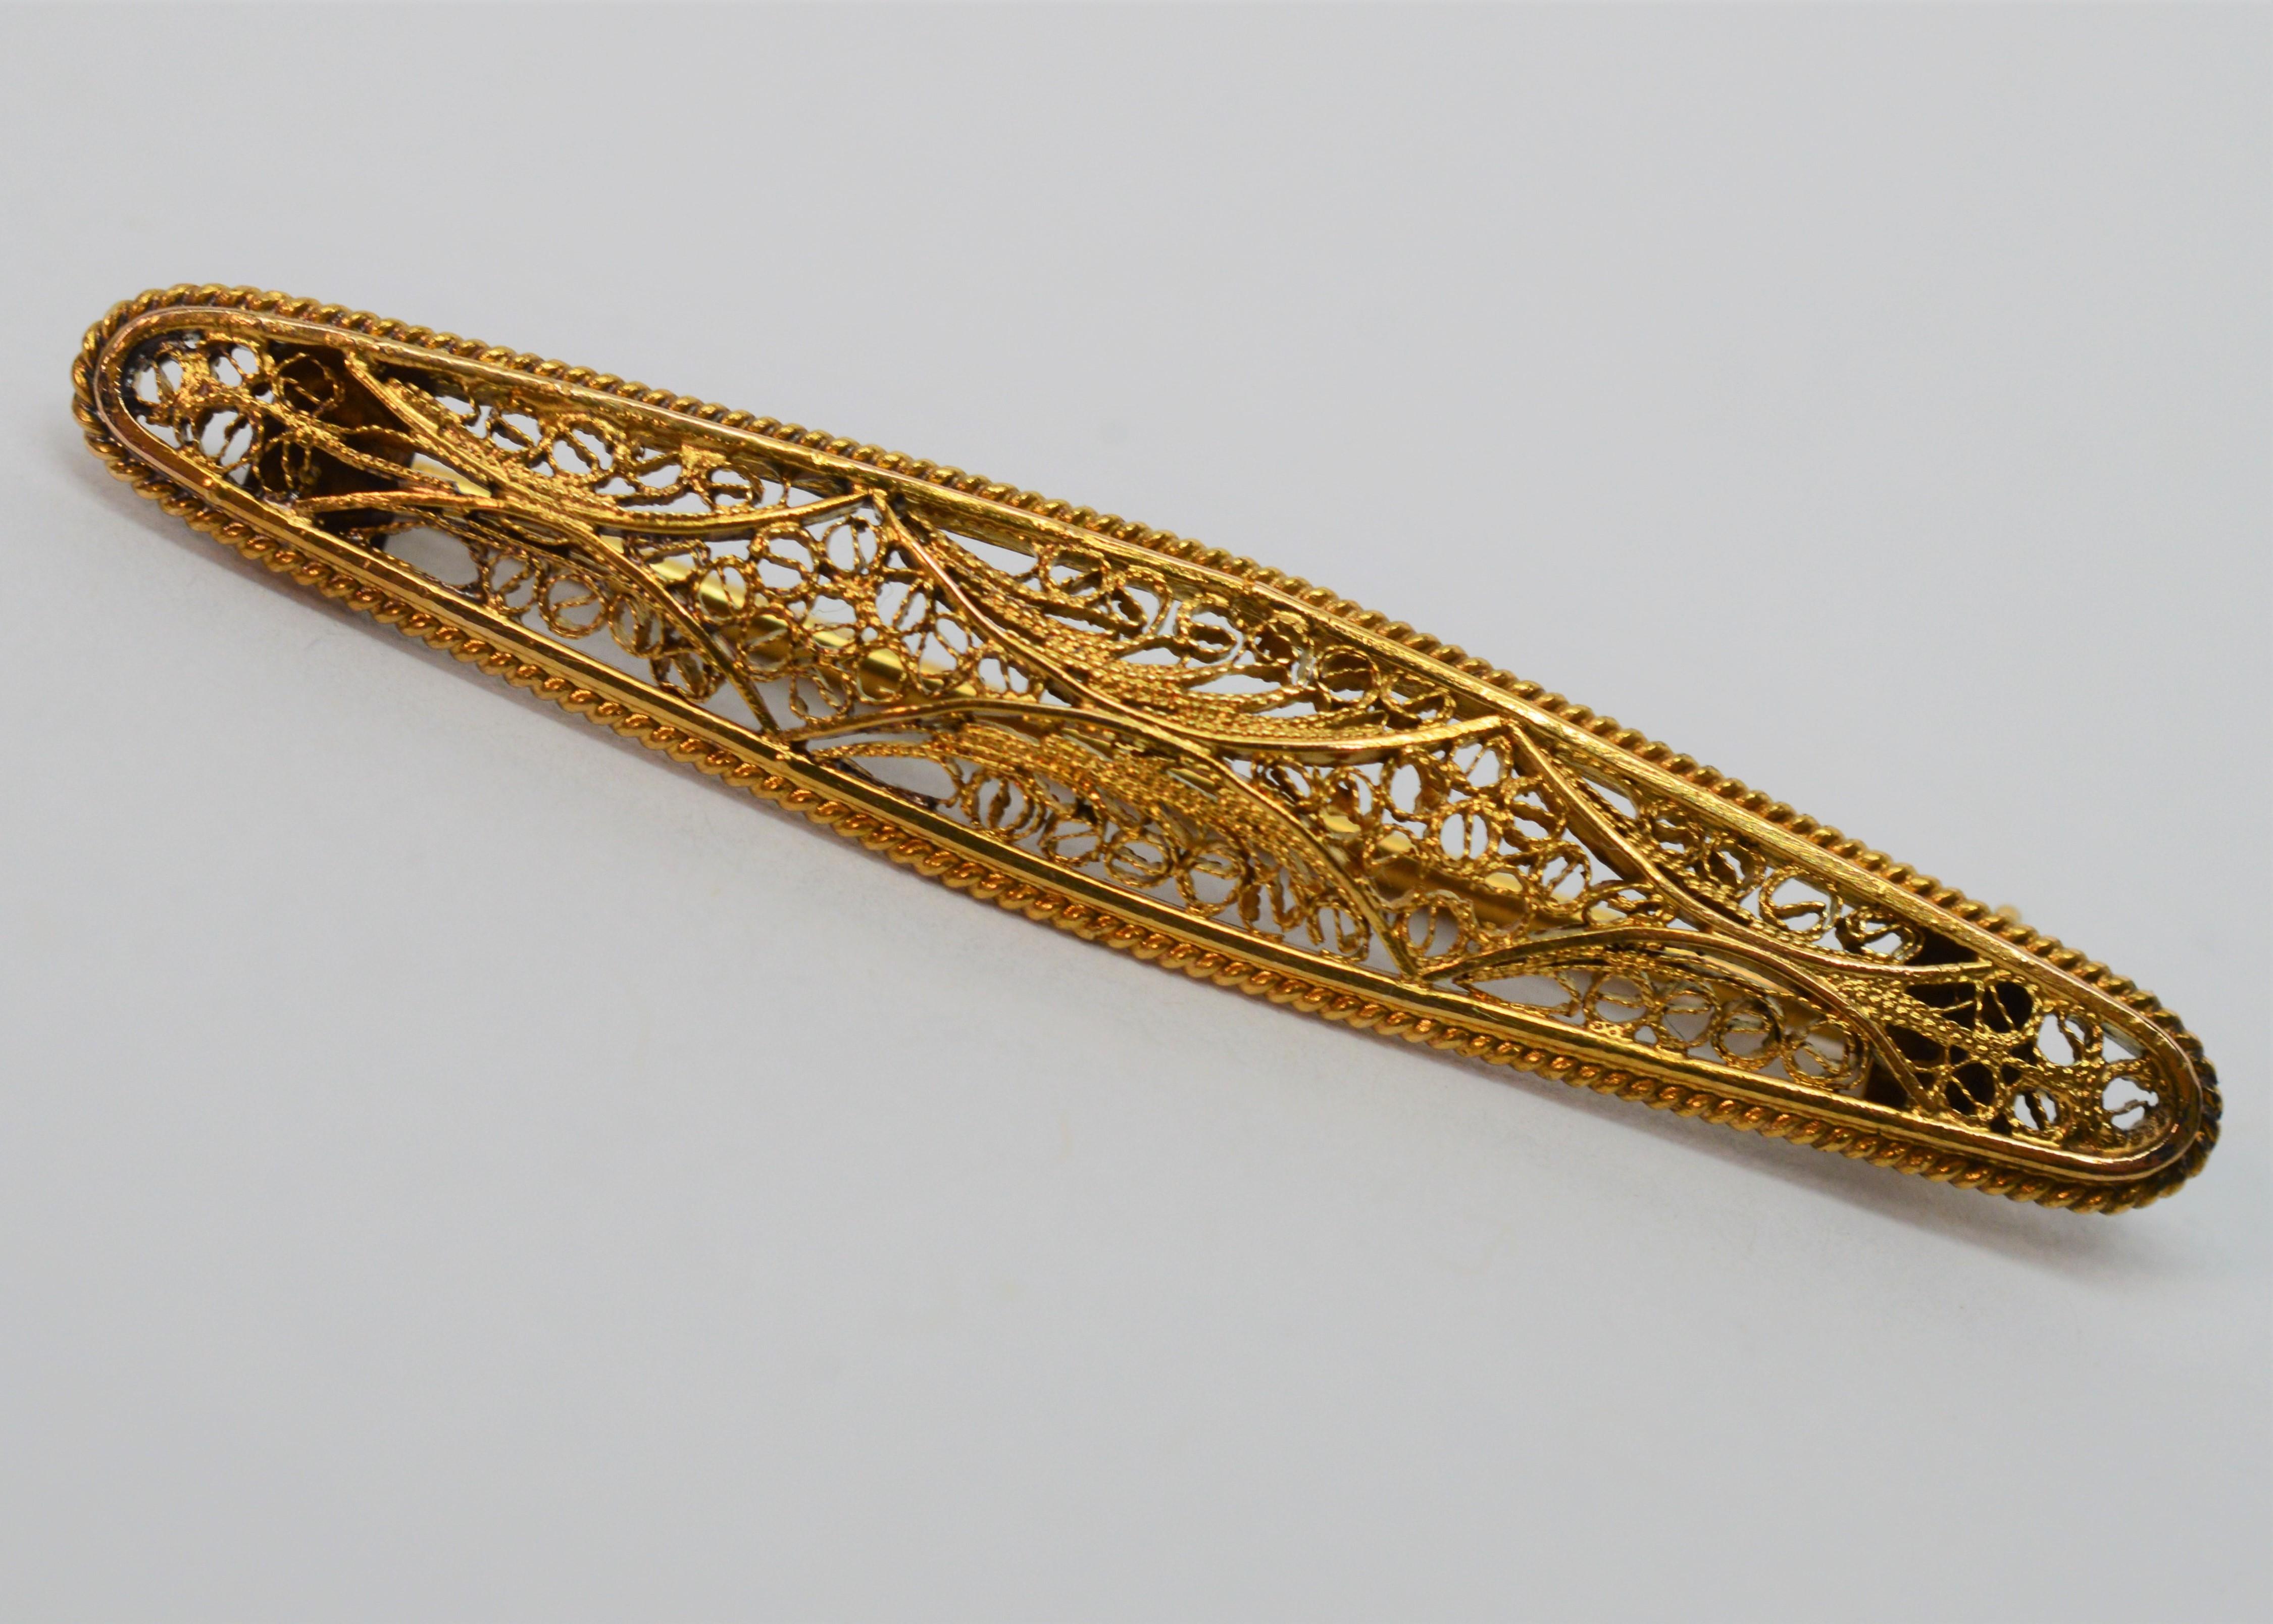 Accent a lapel, scarf or collar with this sweet antique intricate filigree bar pin made of eighteen karat 18K yellow gold .
Measures 1-7/8  inches long and 3/8 inch at its widest point. Fitted with period correct rollover clasp. Gift boxed.  